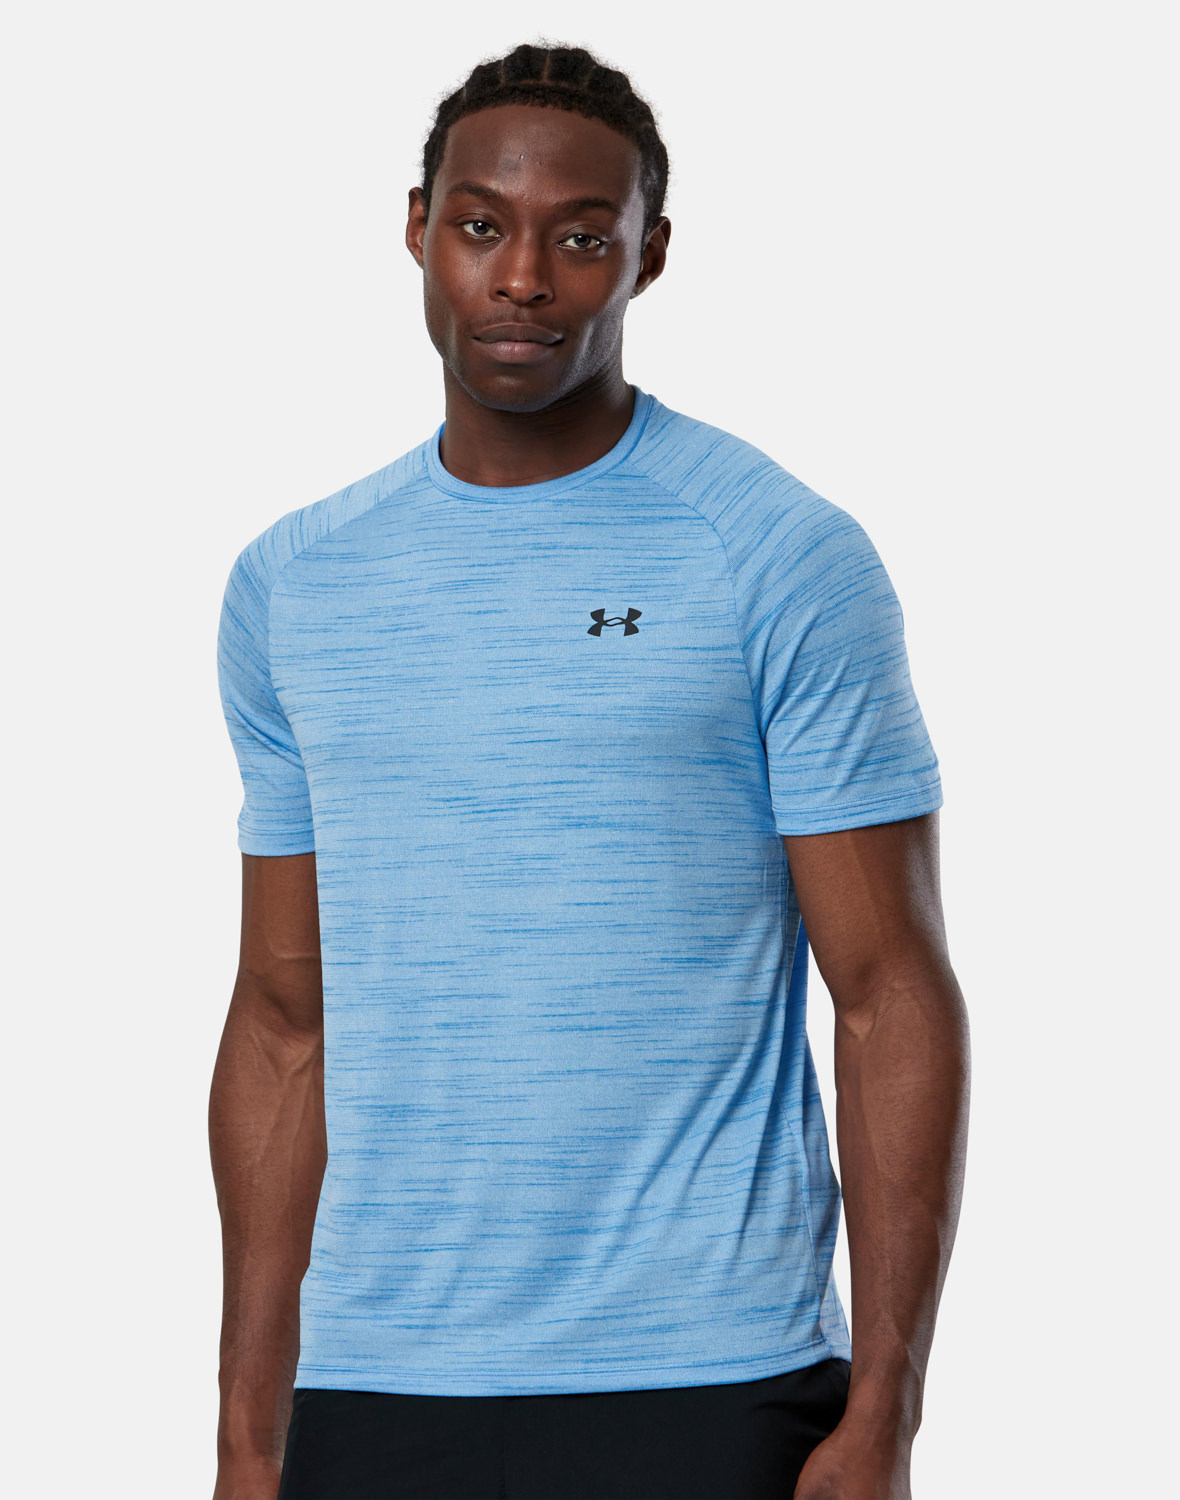 Under Armour Mens Tiger Tech T-Shirt - Blue | Life Style Sports IE